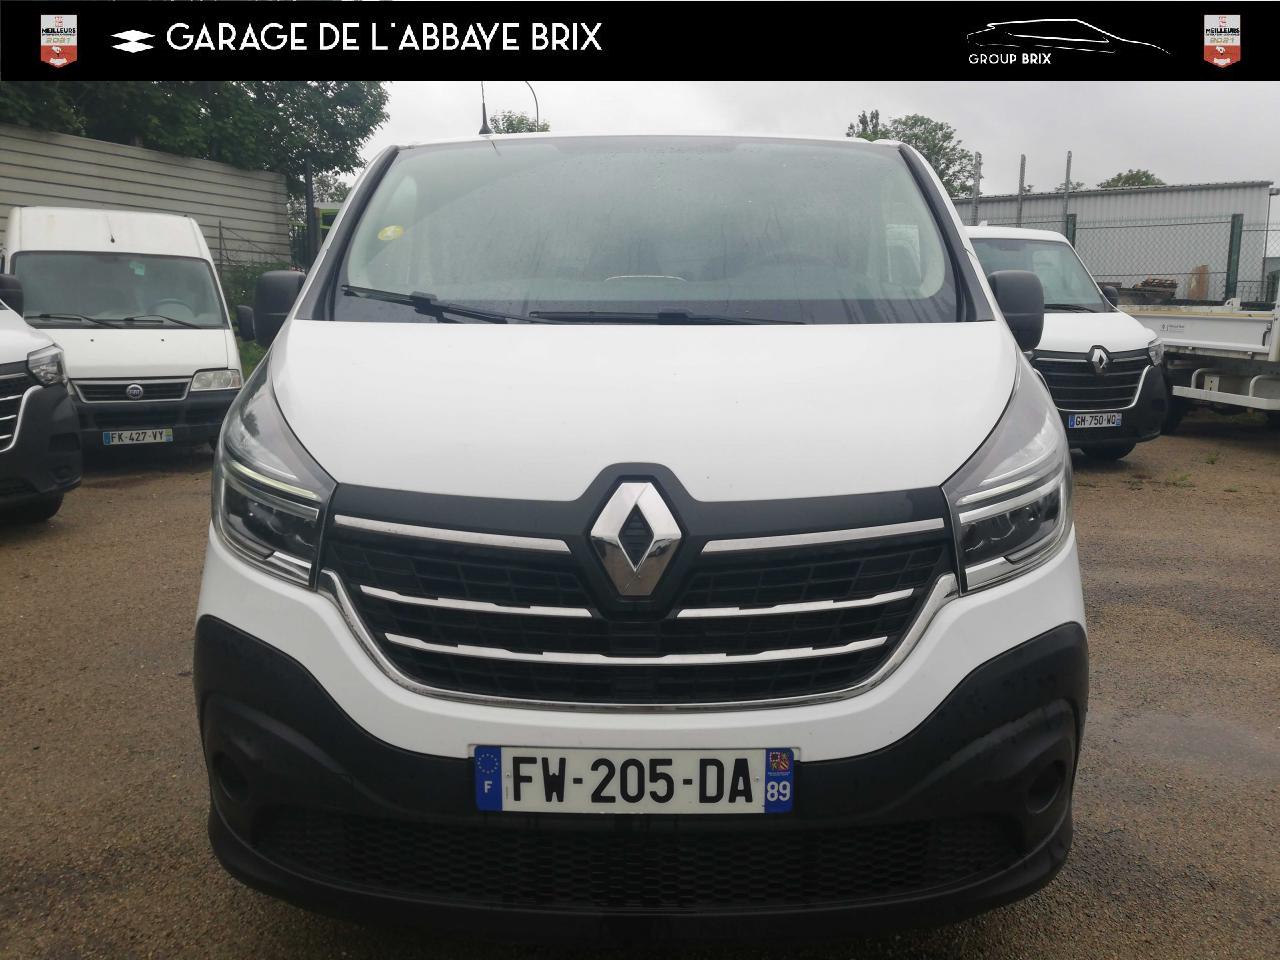 RENAULT-TRAFIC-Trafic L2H1 1200 Kg 2.0 Energy dCi - 145 - BV EDC  III FOURGON Fourgon Grand Confort L2H1 PHASE 2